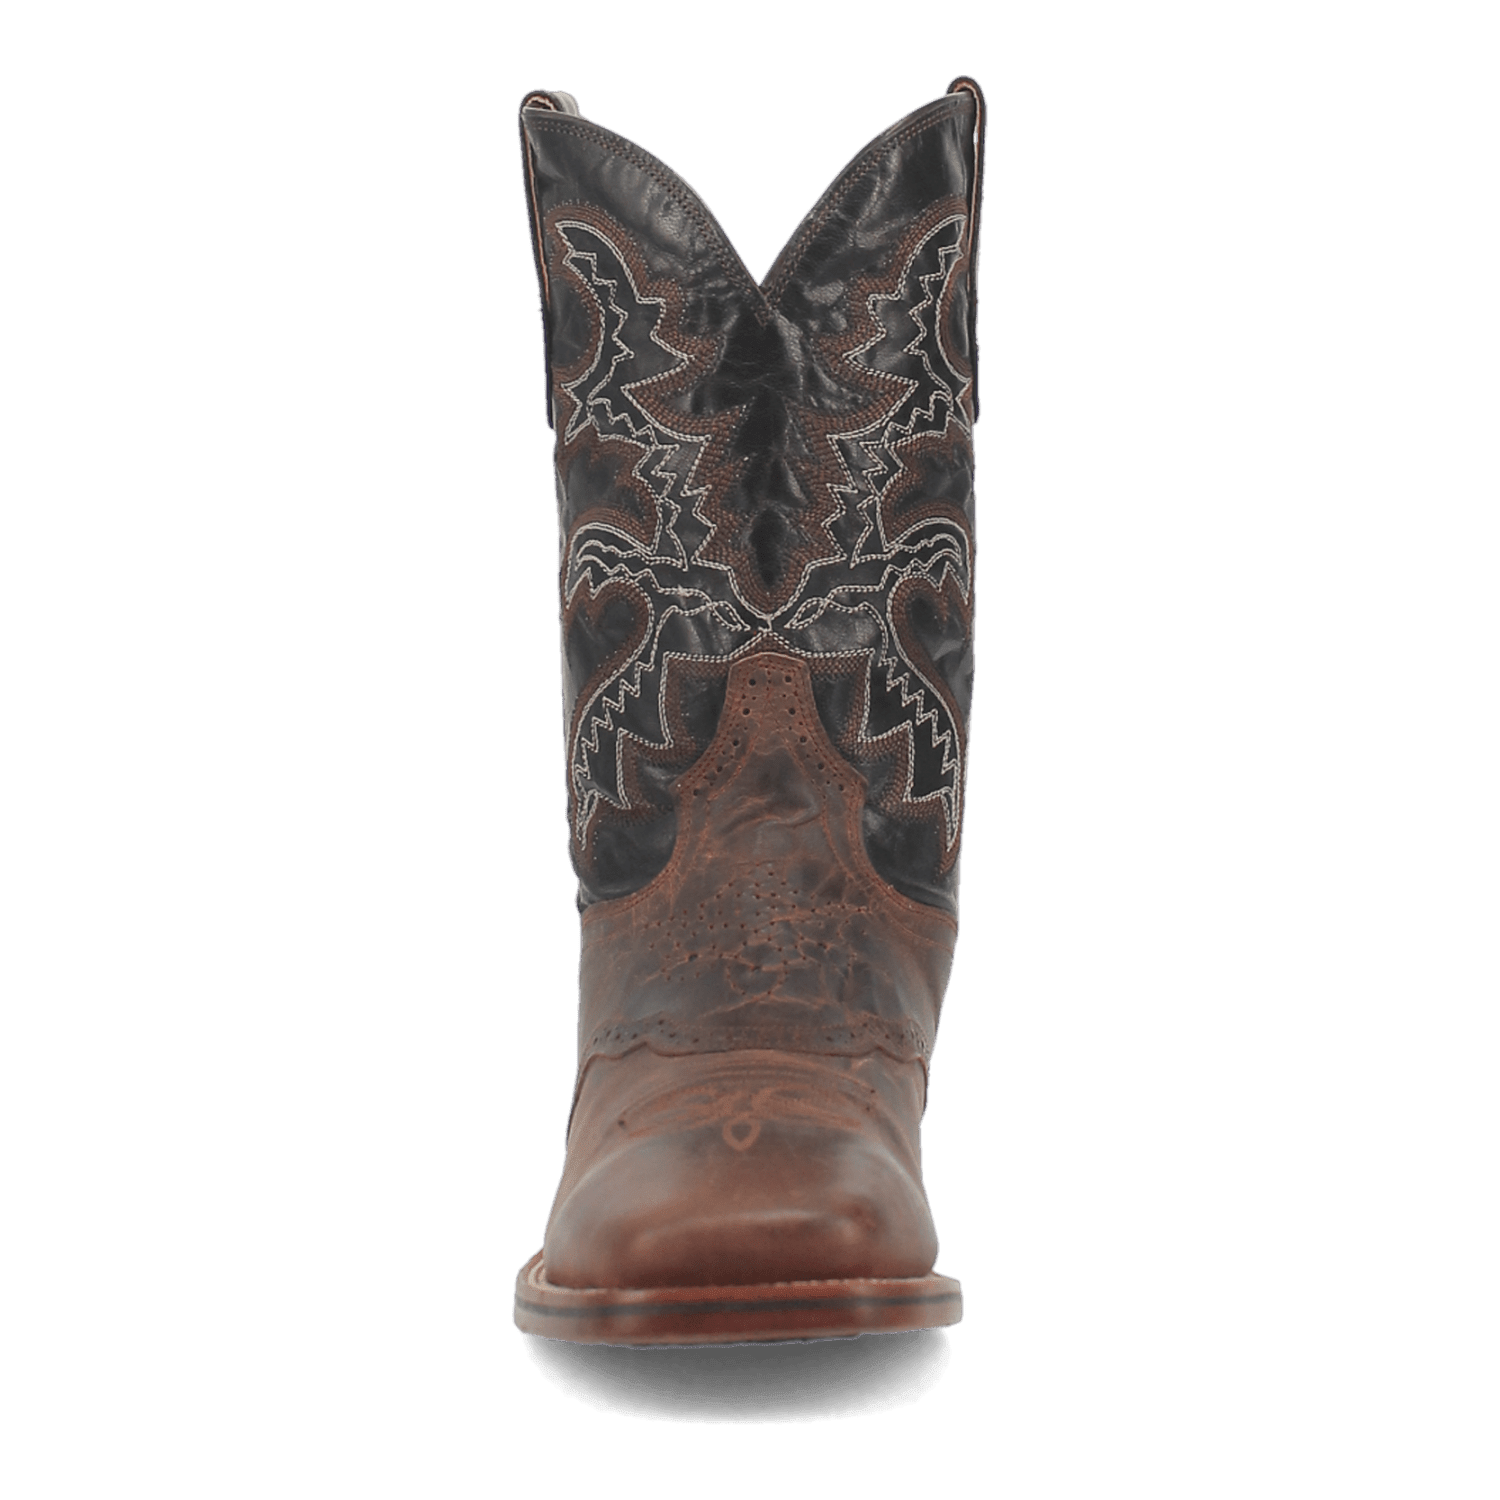 FRANKLIN LEATHER BOOT Image